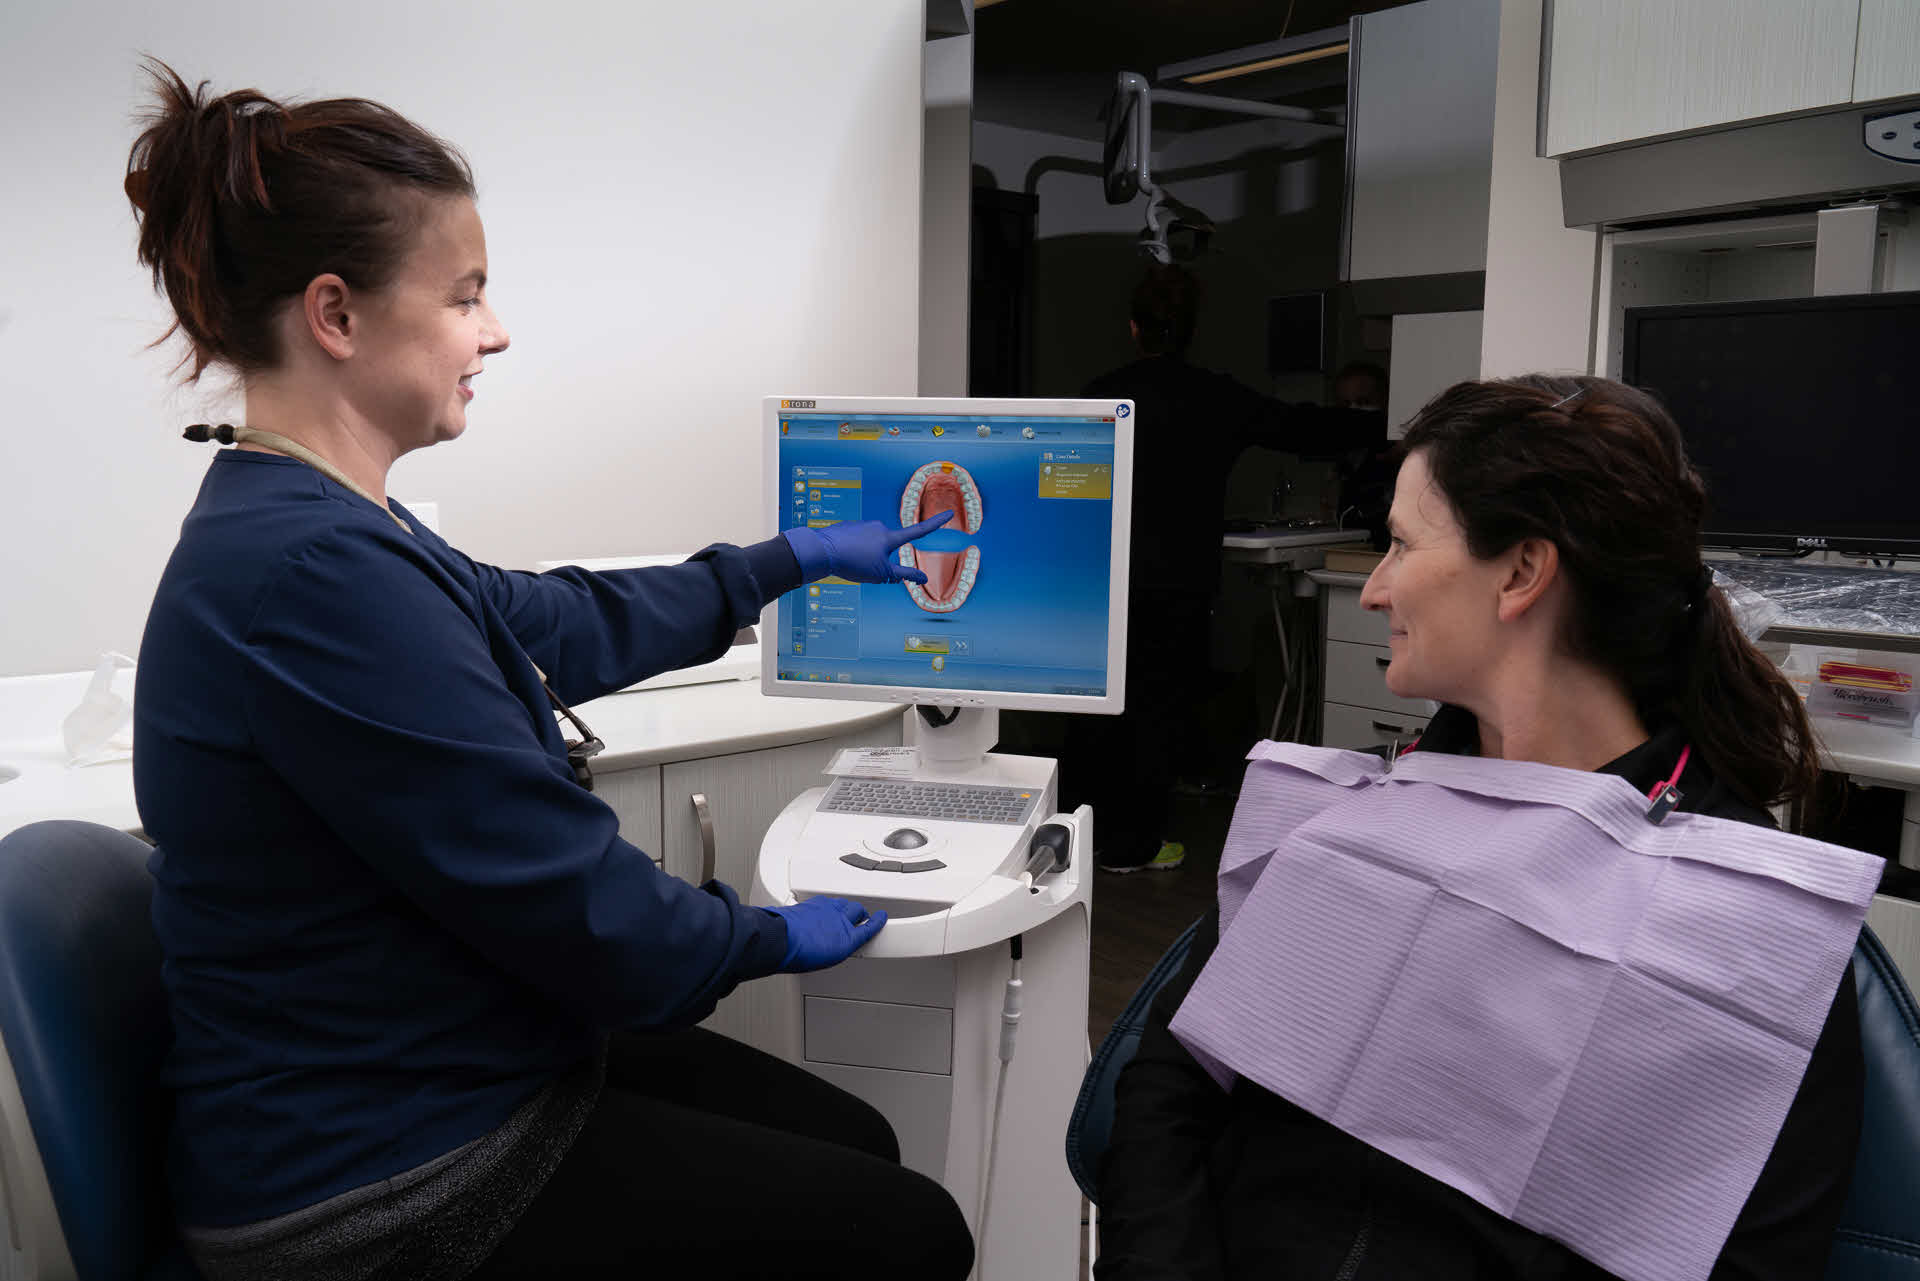 Parkway Dental leads the way among Boise area dentists with state of the art digital dental technology for faster, more accurate diagnosis and treatment.